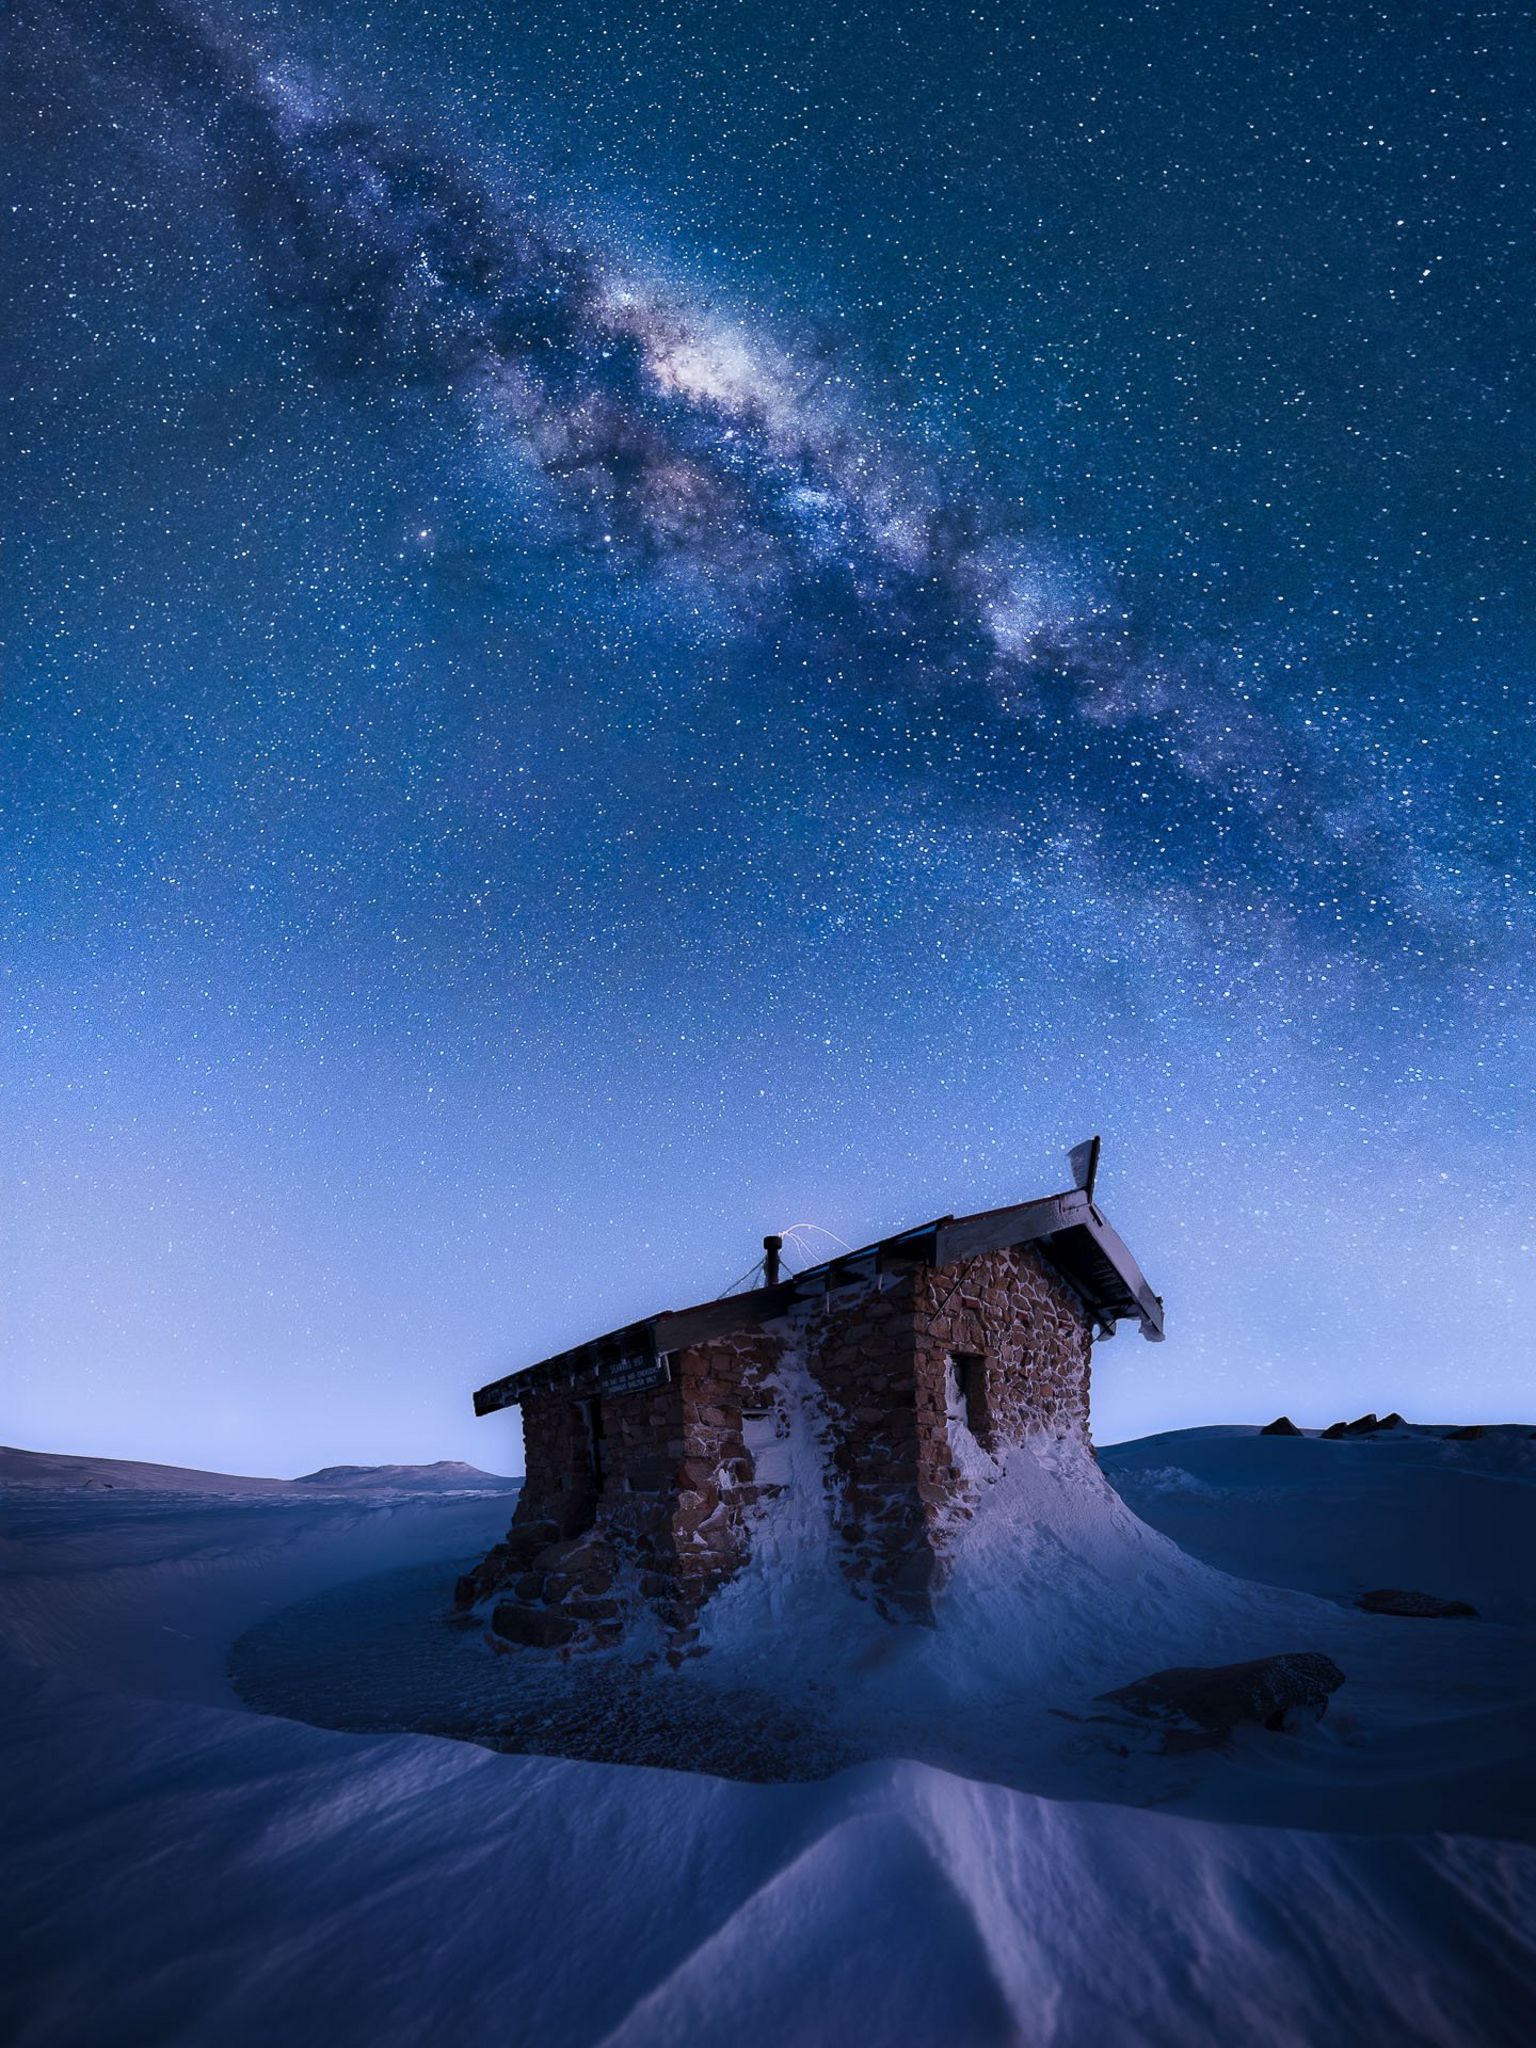 Above the Milky Way and the observation hut on Mount Kosciuszko in Australia.